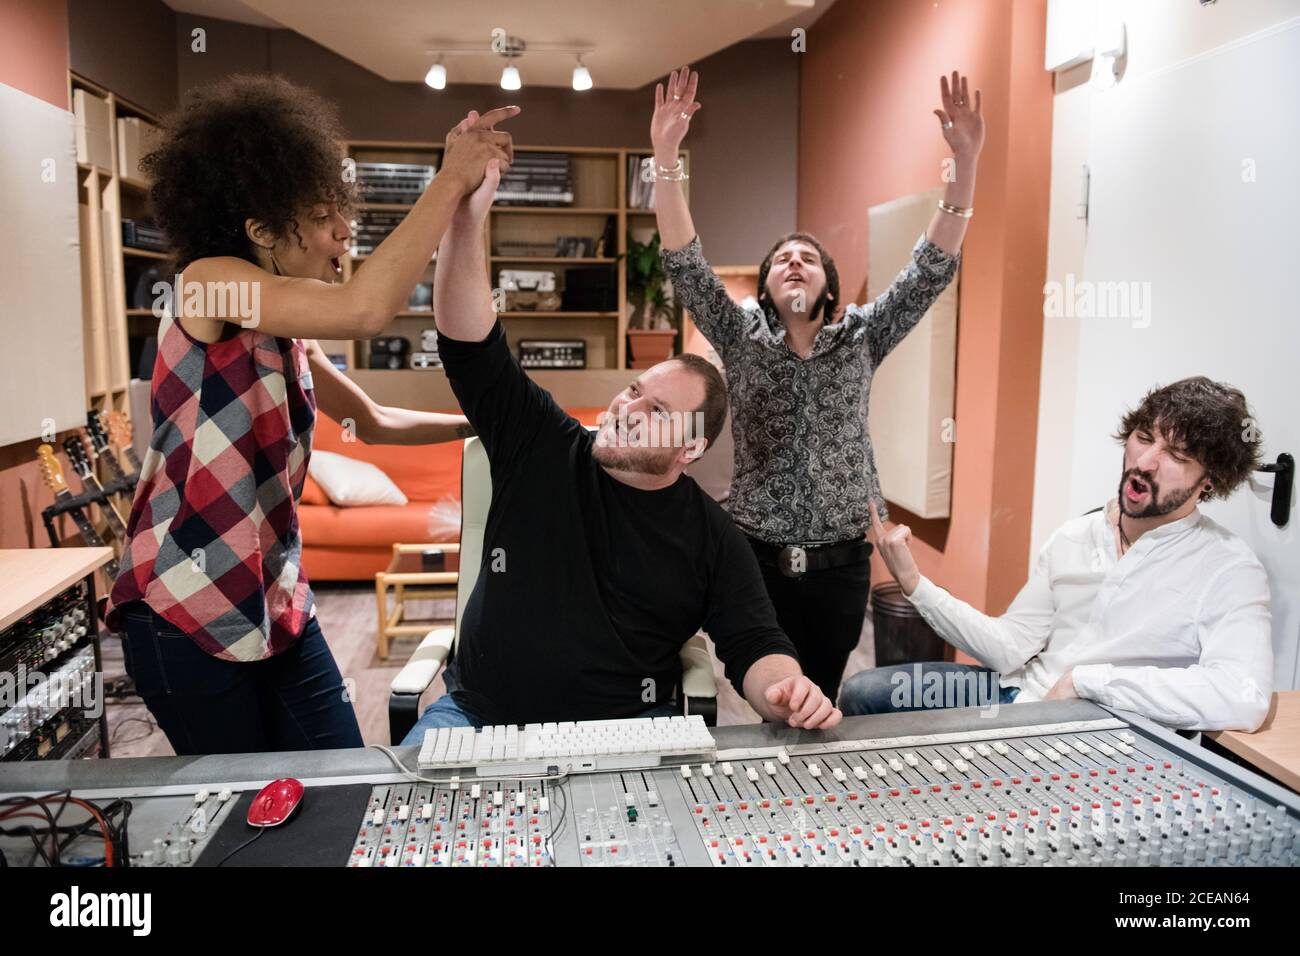 Group of people rejoicing over success and having fun�after recording music in studio Stock Photo